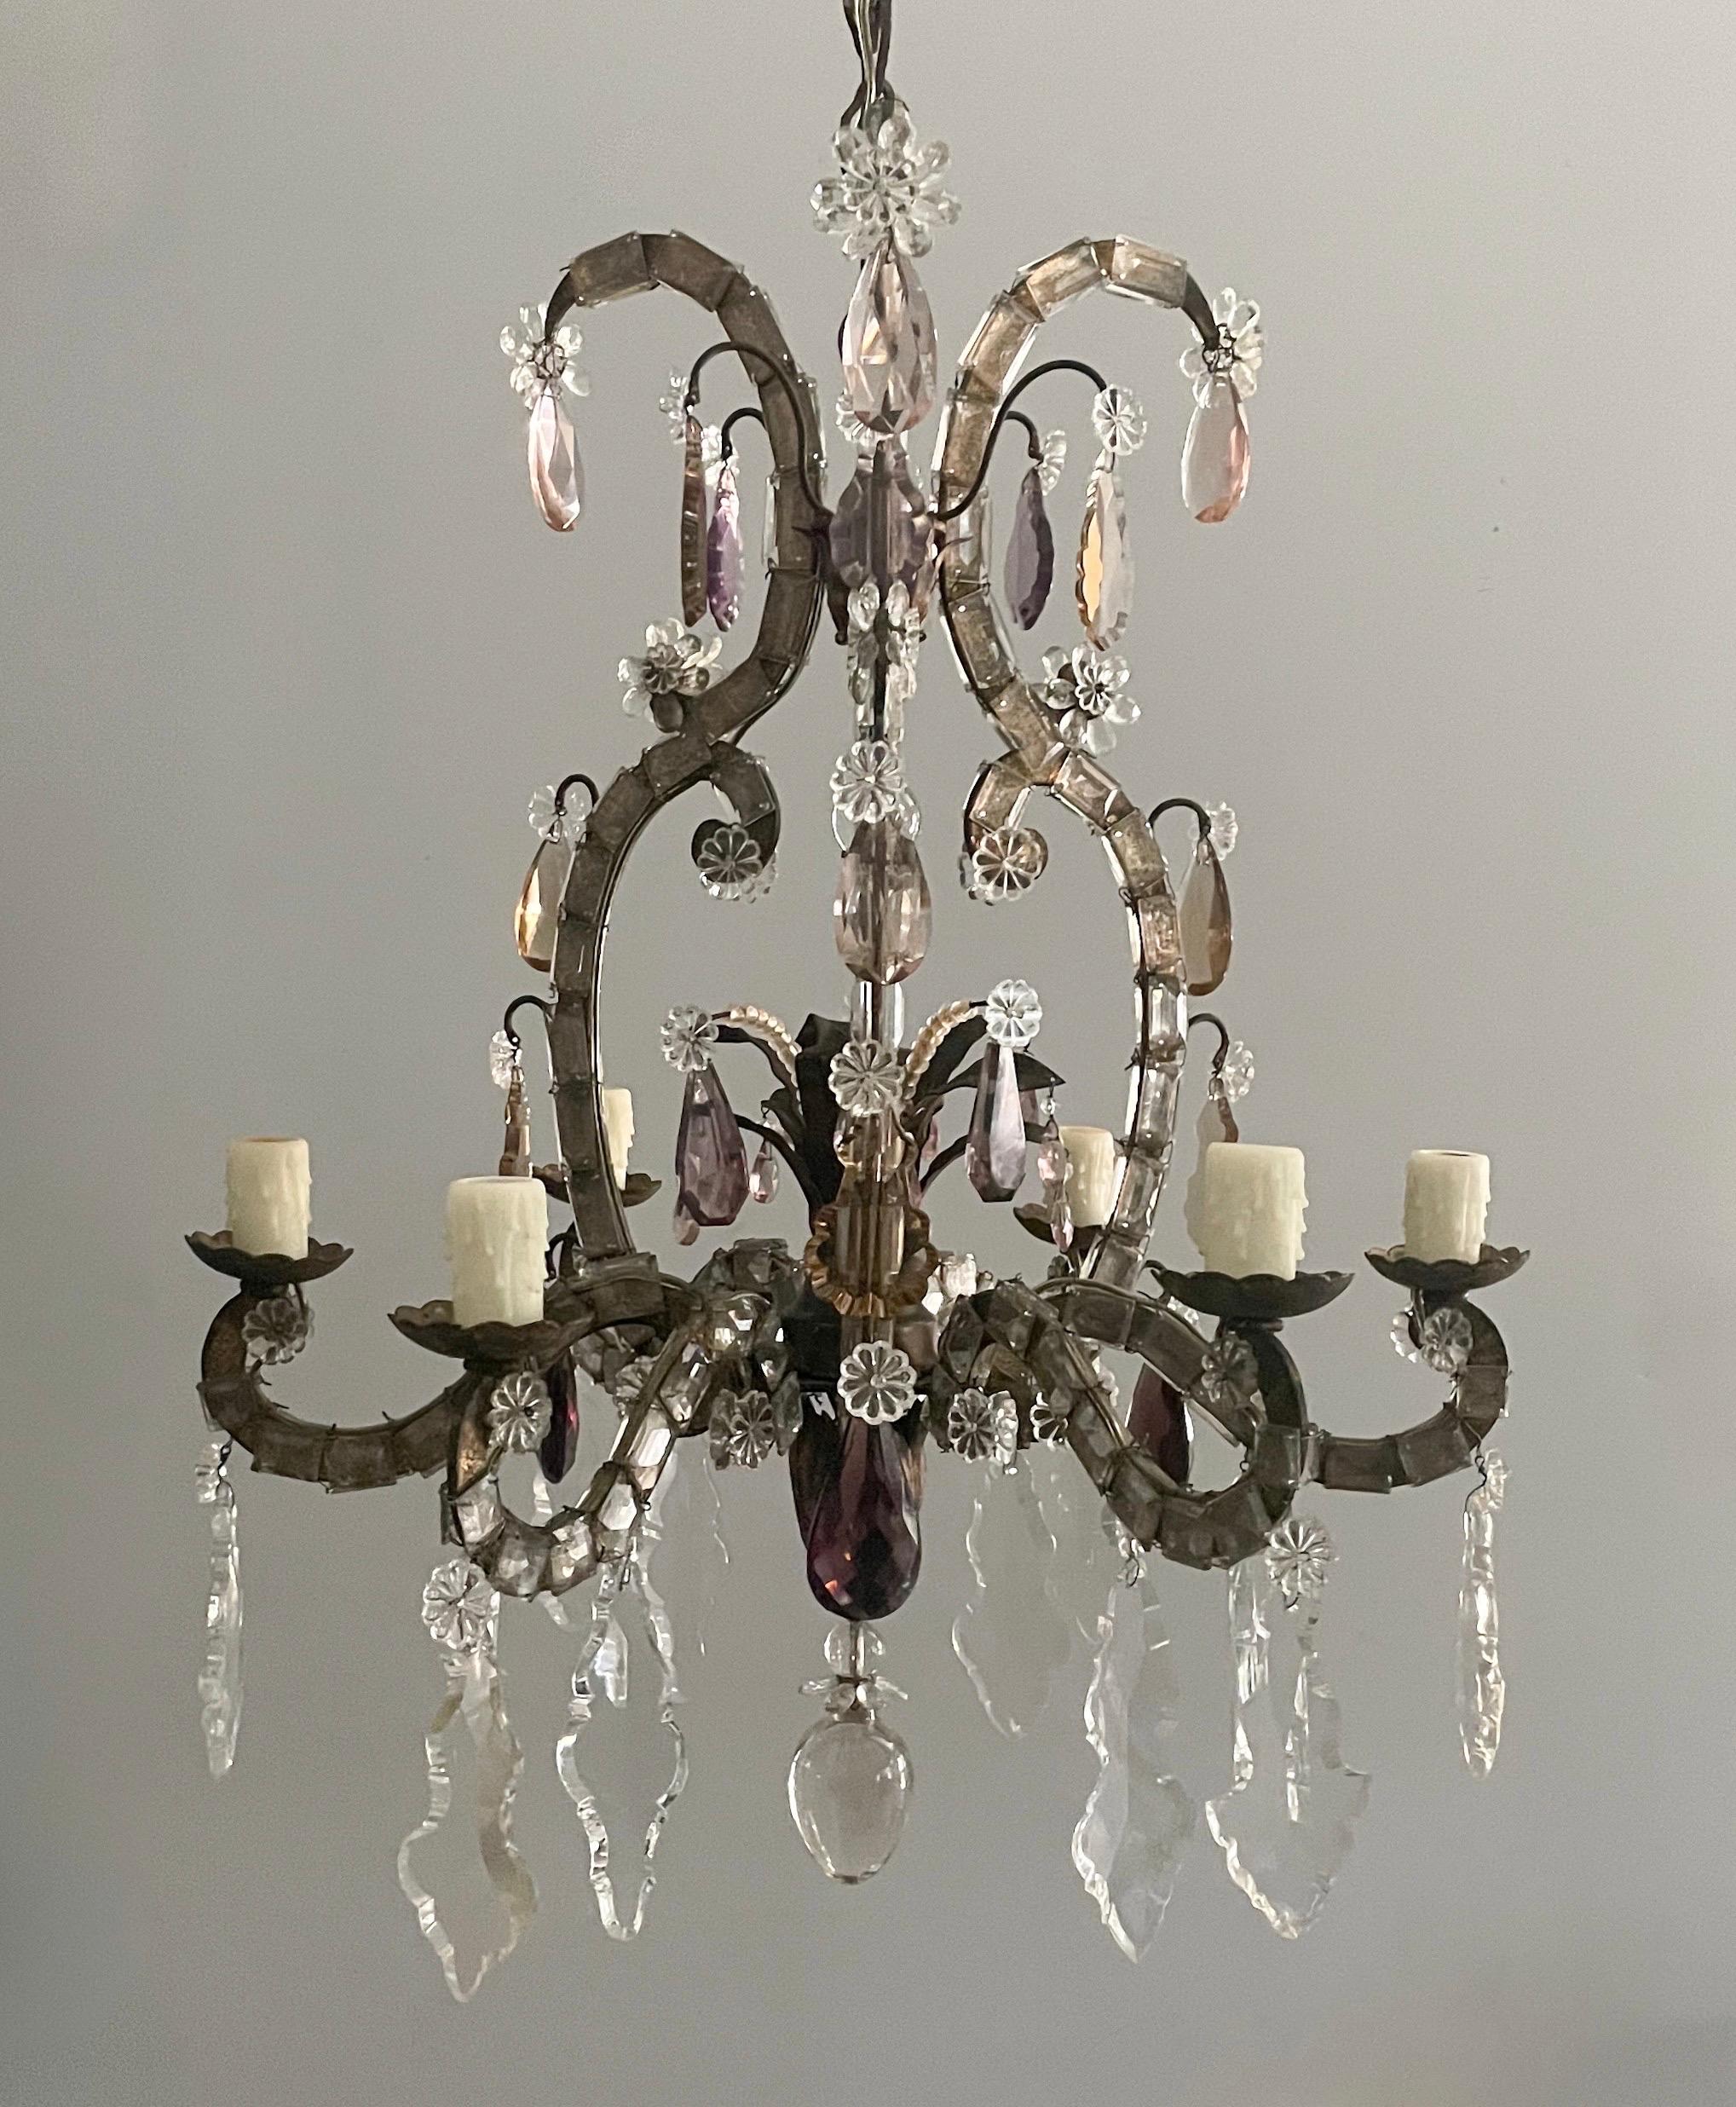 An exquisite, 1920s French gilt-iron and crystal beaded chandelier in the manner of Maison Baguès.

The chandelier features a scrolled-iron frame with a naturally distressed gilt-finish. Faceted square and rectangular prisms outline the chandelier’s